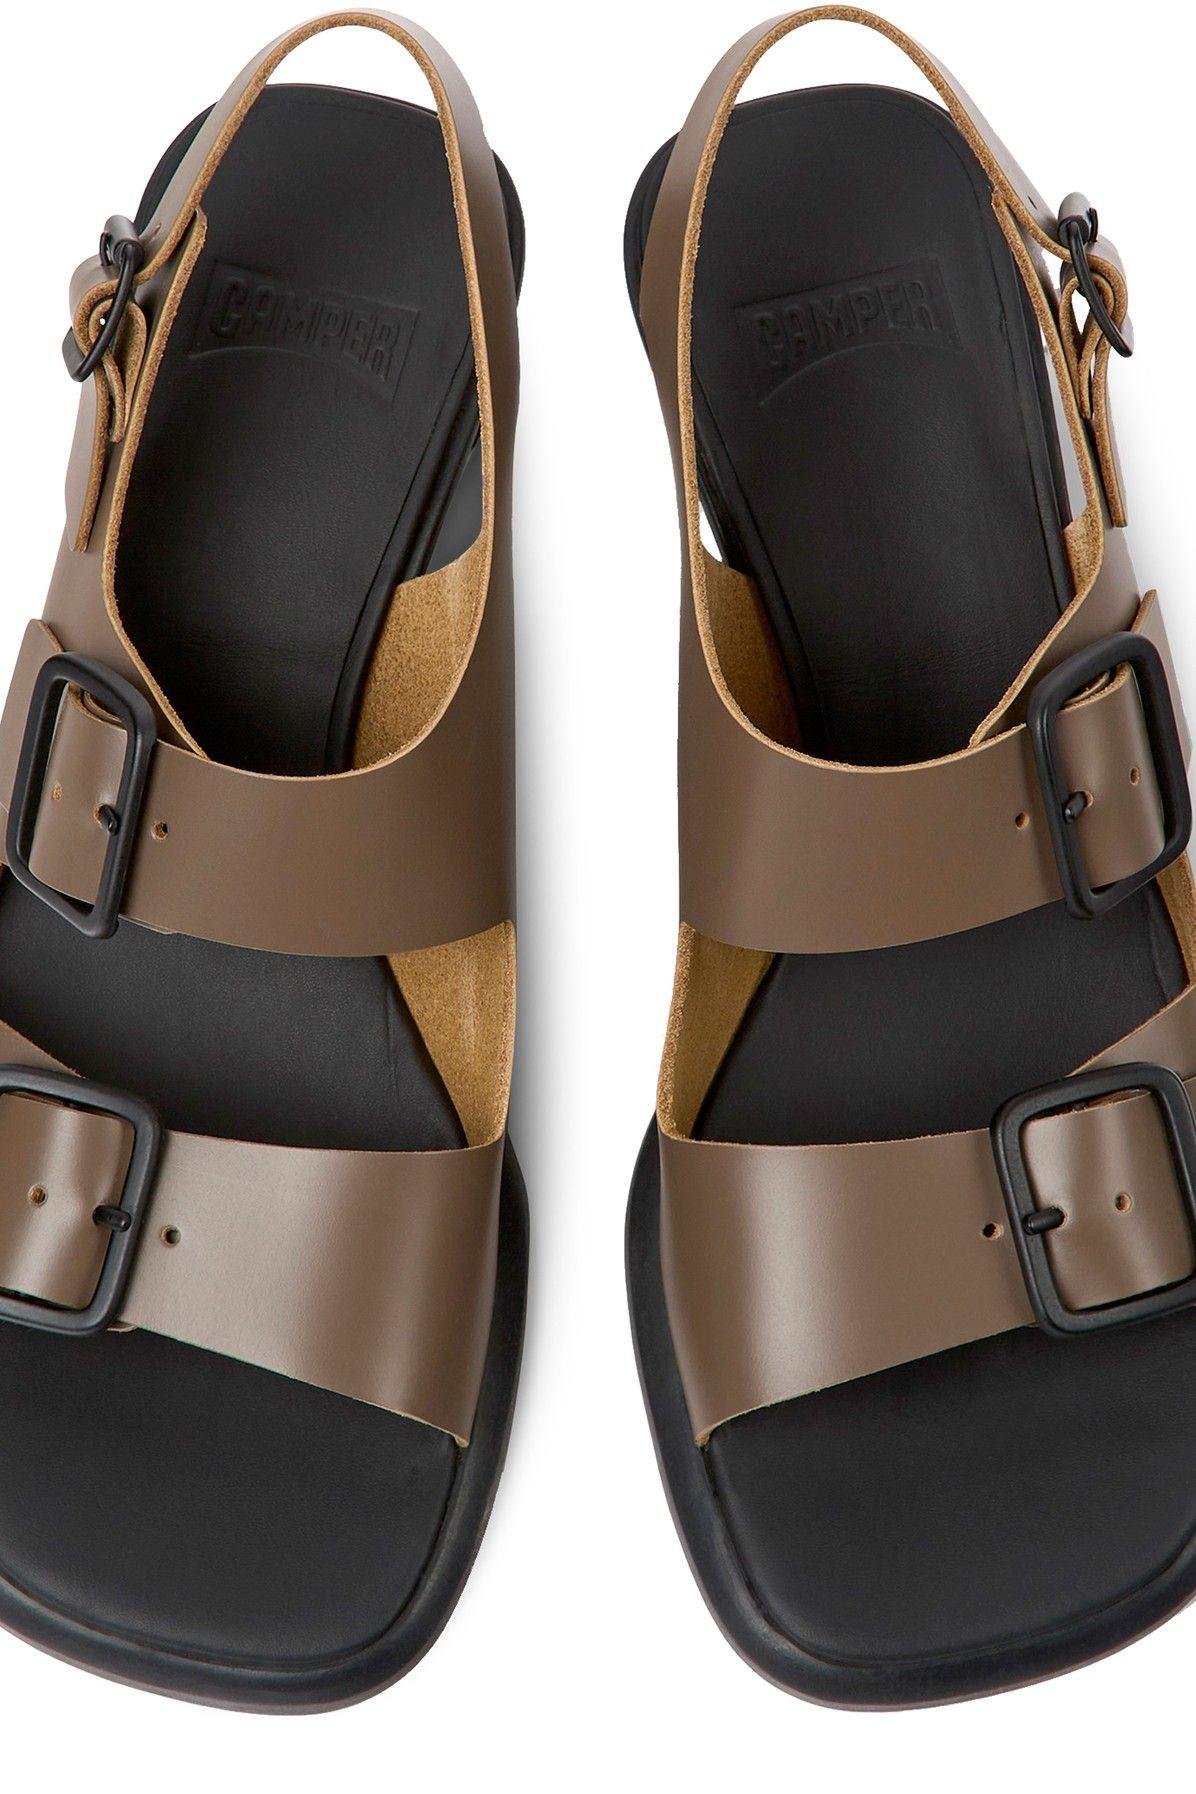 Camper Dina Sandals Mid-length in Brown | Lyst